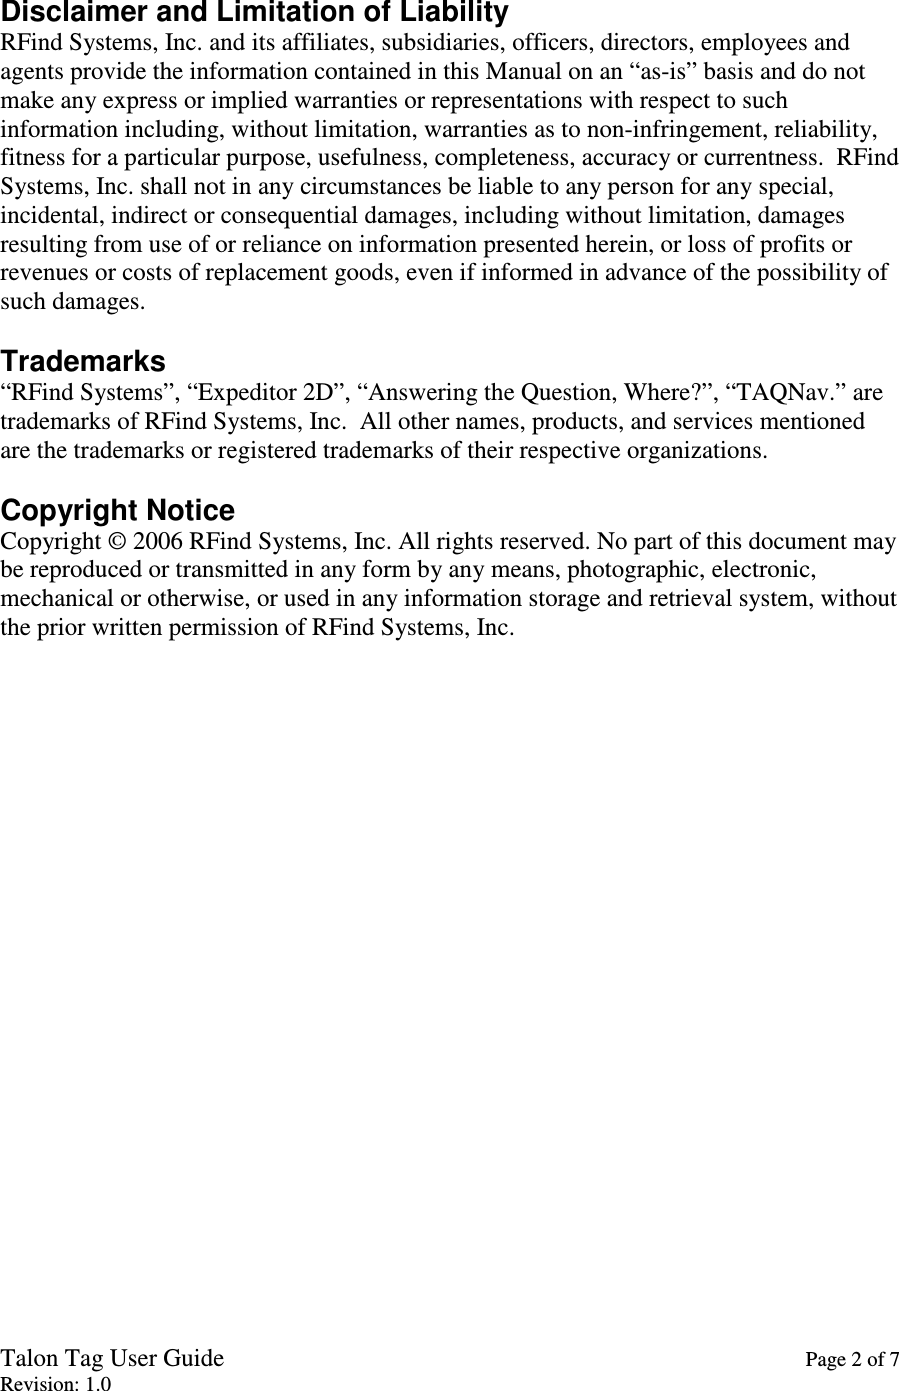 Talon Tag User Guide    Page 2 of 7 Revision: 1.0  Disclaimer and Limitation of Liability RFind Systems, Inc. and its affiliates, subsidiaries, officers, directors, employees and agents provide the information contained in this Manual on an “as-is” basis and do not make any express or implied warranties or representations with respect to such information including, without limitation, warranties as to non-infringement, reliability, fitness for a particular purpose, usefulness, completeness, accuracy or currentness.  RFind Systems, Inc. shall not in any circumstances be liable to any person for any special, incidental, indirect or consequential damages, including without limitation, damages resulting from use of or reliance on information presented herein, or loss of profits or revenues or costs of replacement goods, even if informed in advance of the possibility of such damages.  Trademarks “RFind Systems”, “Expeditor 2D”, “Answering the Question, Where?”, “TAQNav.” are trademarks of RFind Systems, Inc.  All other names, products, and services mentioned are the trademarks or registered trademarks of their respective organizations.  Copyright Notice Copyright © 2006 RFind Systems, Inc. All rights reserved. No part of this document may be reproduced or transmitted in any form by any means, photographic, electronic, mechanical or otherwise, or used in any information storage and retrieval system, without the prior written permission of RFind Systems, Inc. 